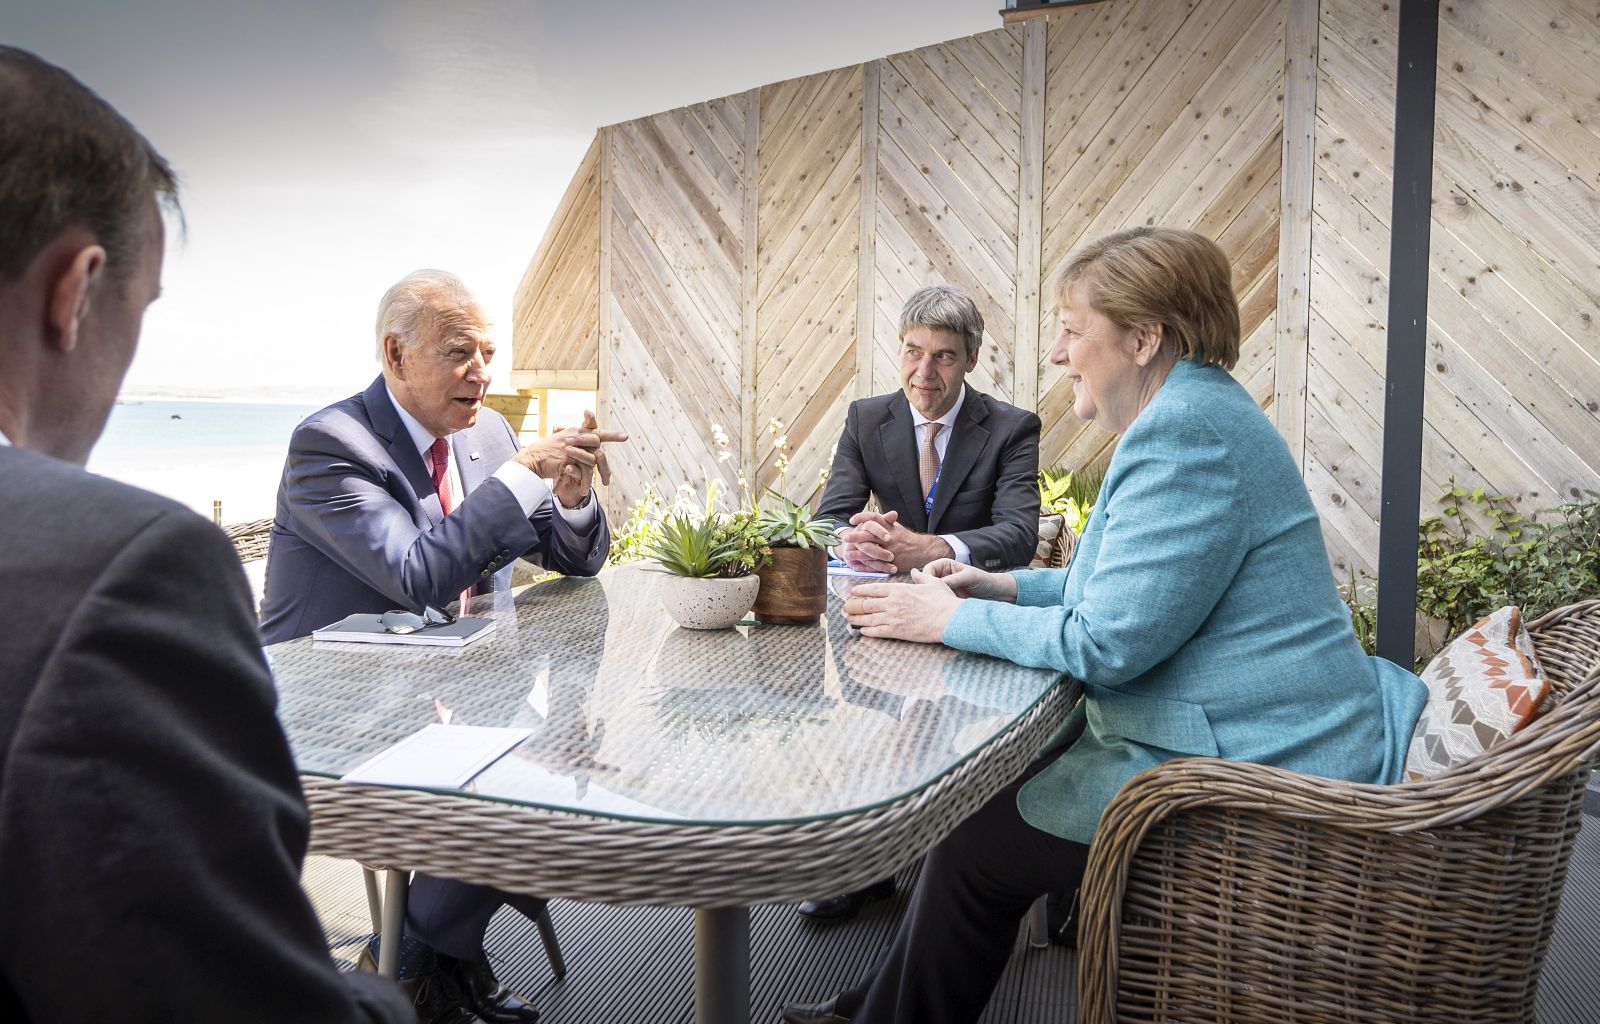 epa09264327 A handout photo made available by the German Government Press Office (BPA) shows German Chancellor Angela Merkel (R) and US President Joe Biden (2-L) at the beginning of their meeting on the sidelines of the G7 summit, in St. Ives, Cornwall, Britain, 12 June 2021. In picture attending the meeting are foreign policy advisor to Chancellor Merkel, Jan Hecker (2-R) and US National Security Advisor Jake Sullivan (L).  EPA/GUIDO BERGMANN/BPA HANDOUT  HANDOUT EDITORIAL USE ONLY/NO SALES